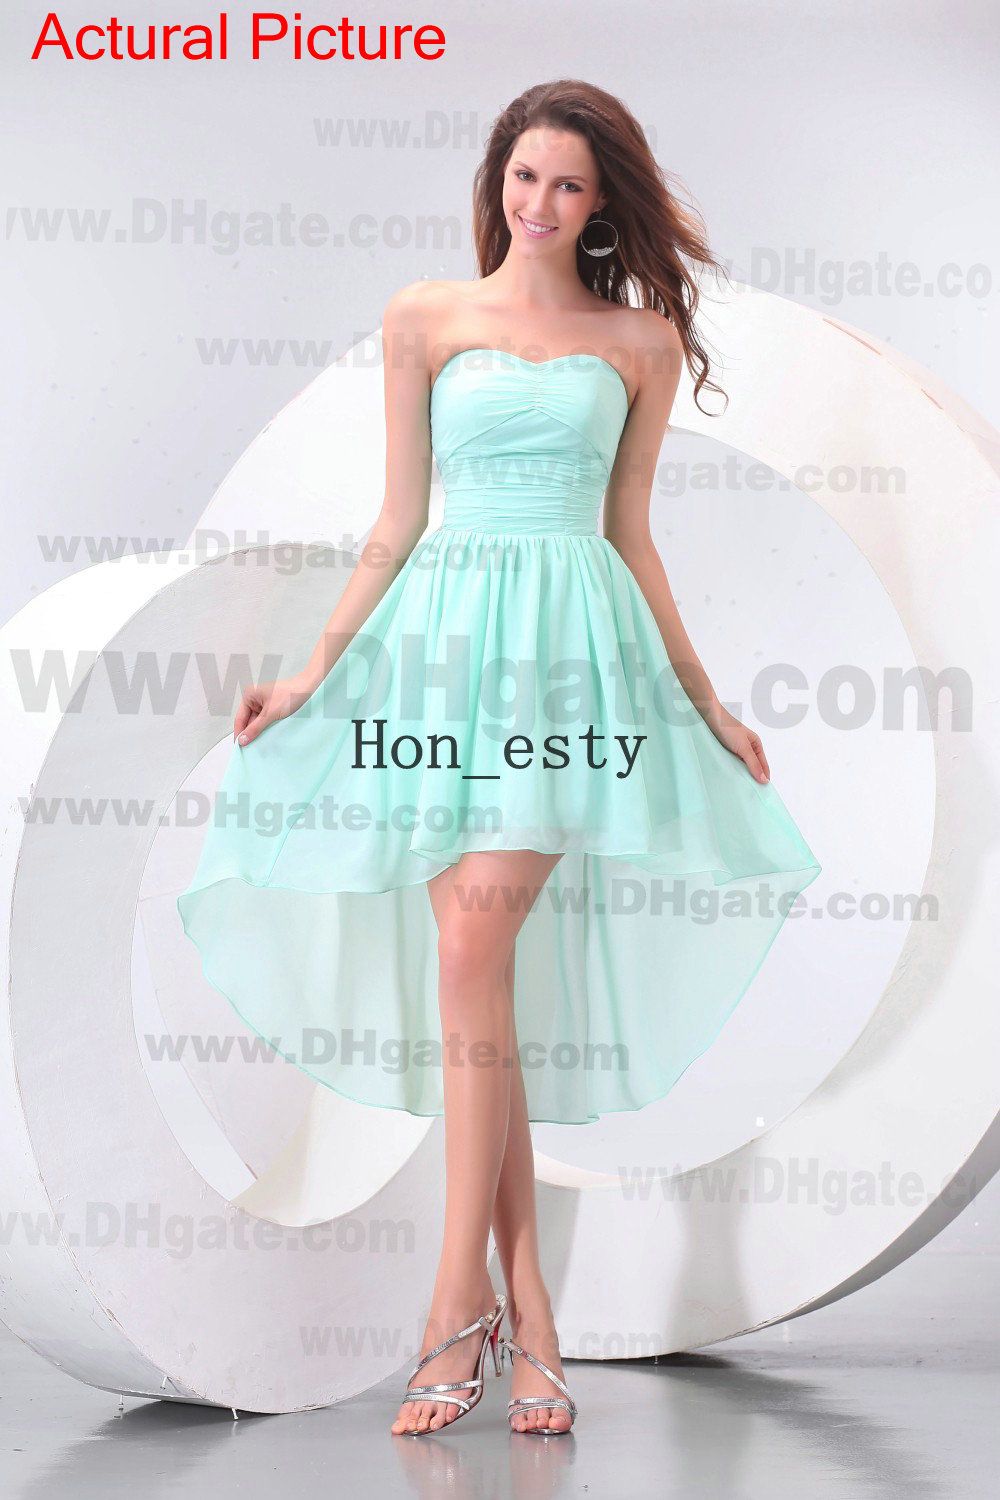 Baby Blue Party Dresses